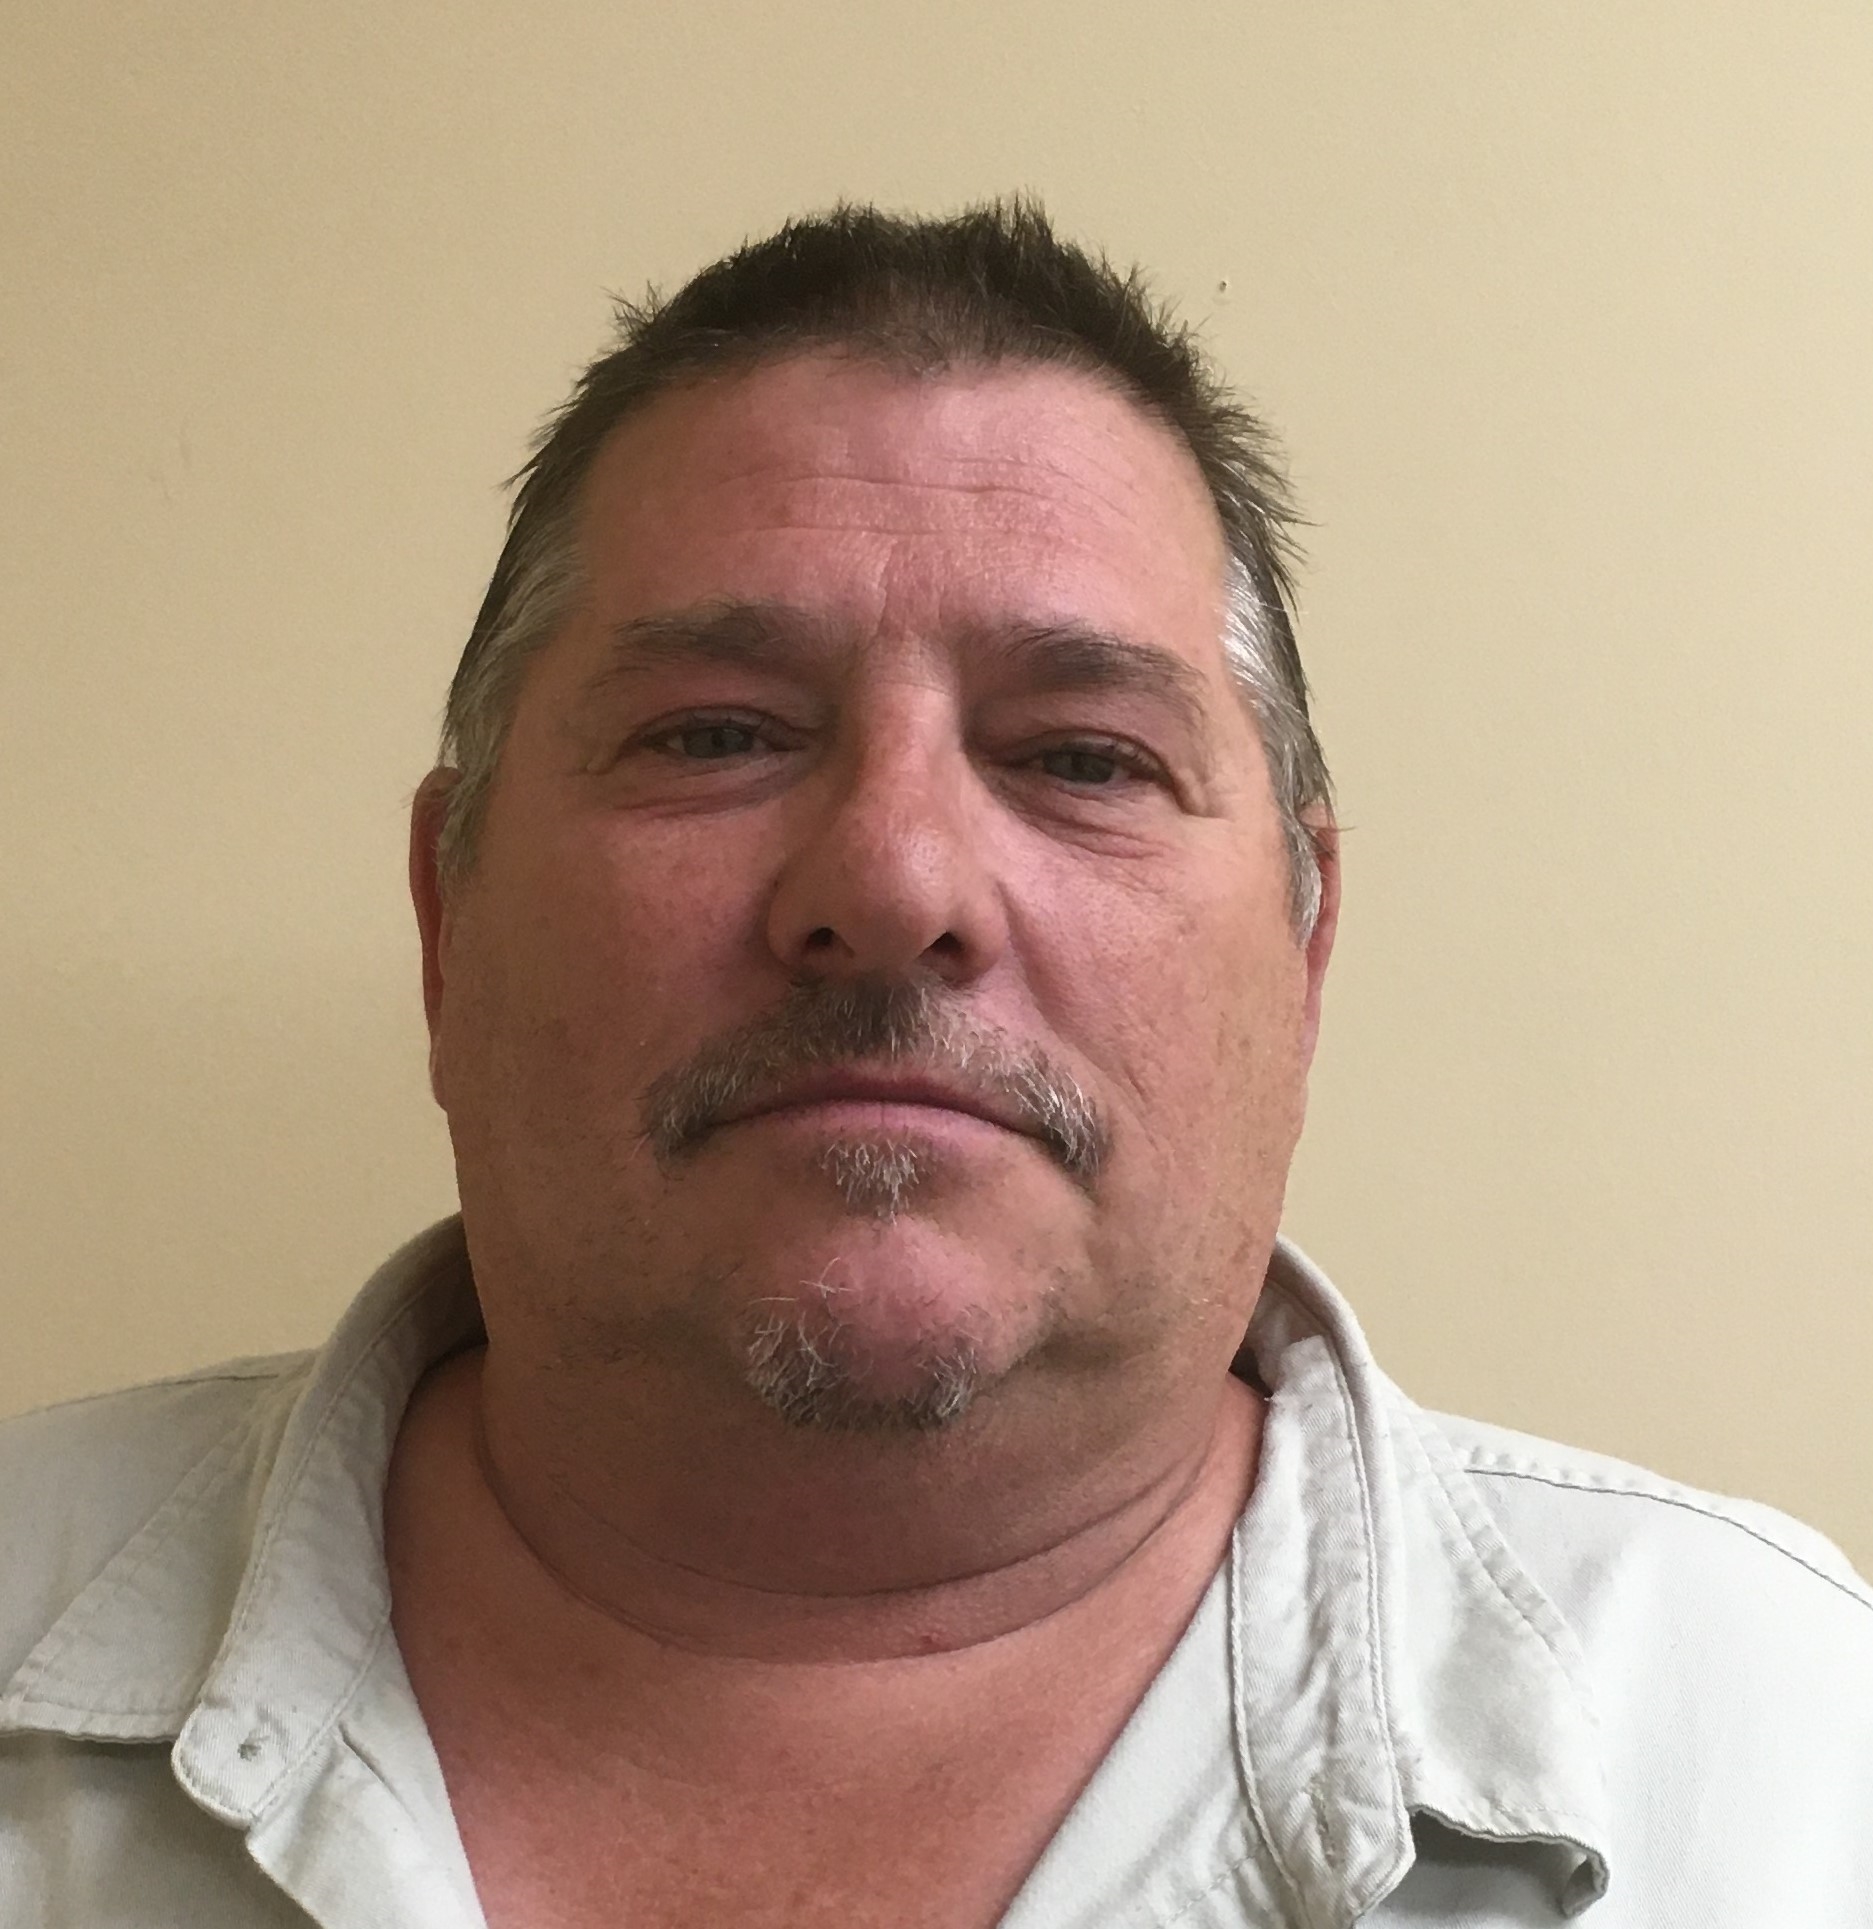 Pictured: Bobby Foley, Director of Operations for Cascade's Civil and Environmental Construction division